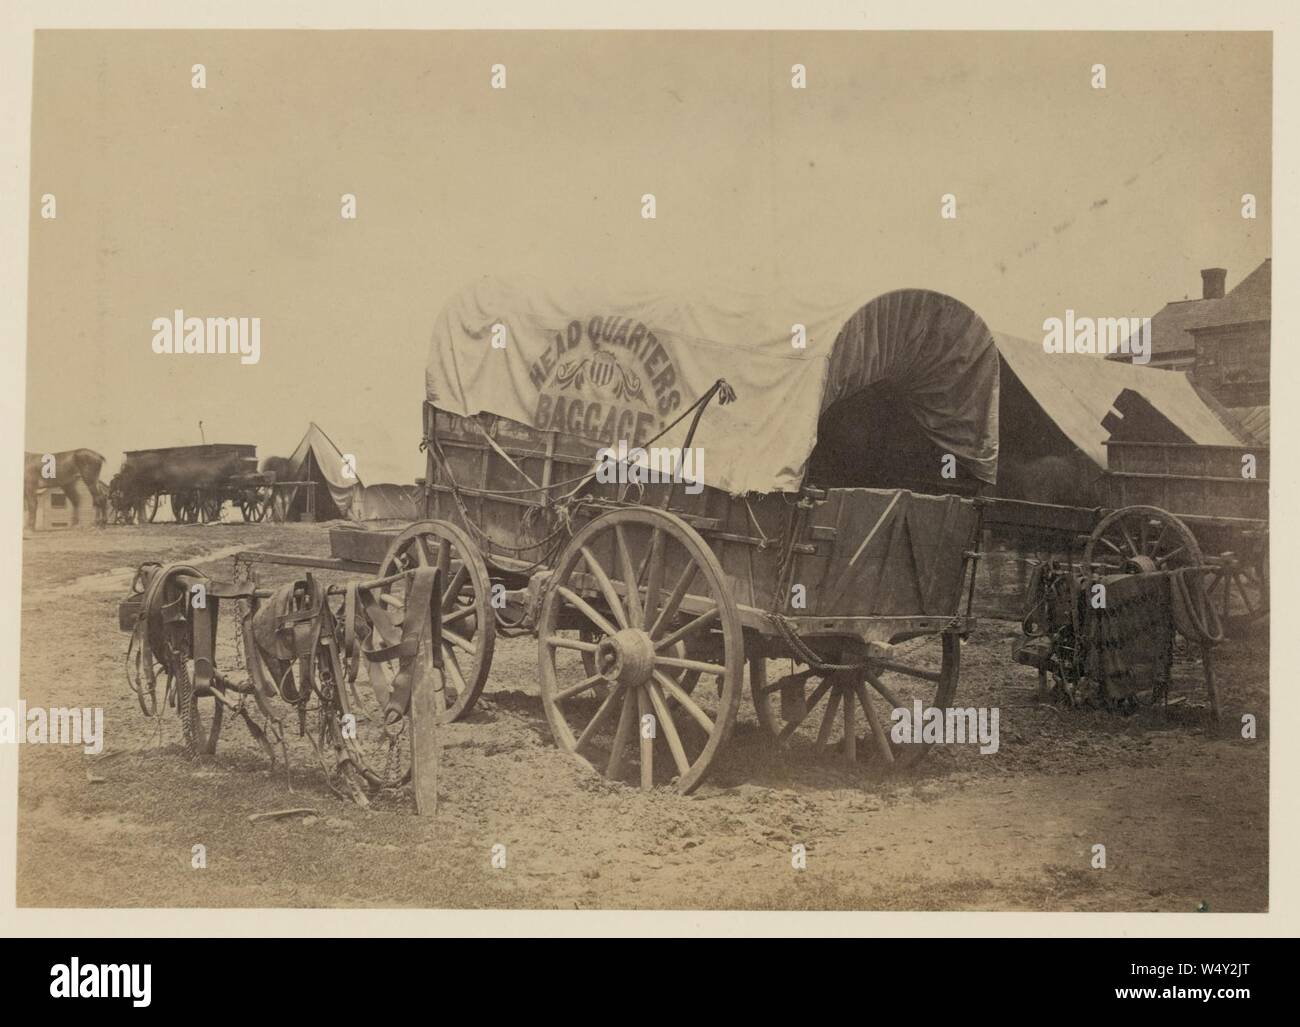 Covered wagon for ‘Headquarters baggage‘ and saddlery, probably a Civil War military camp Stock Photo